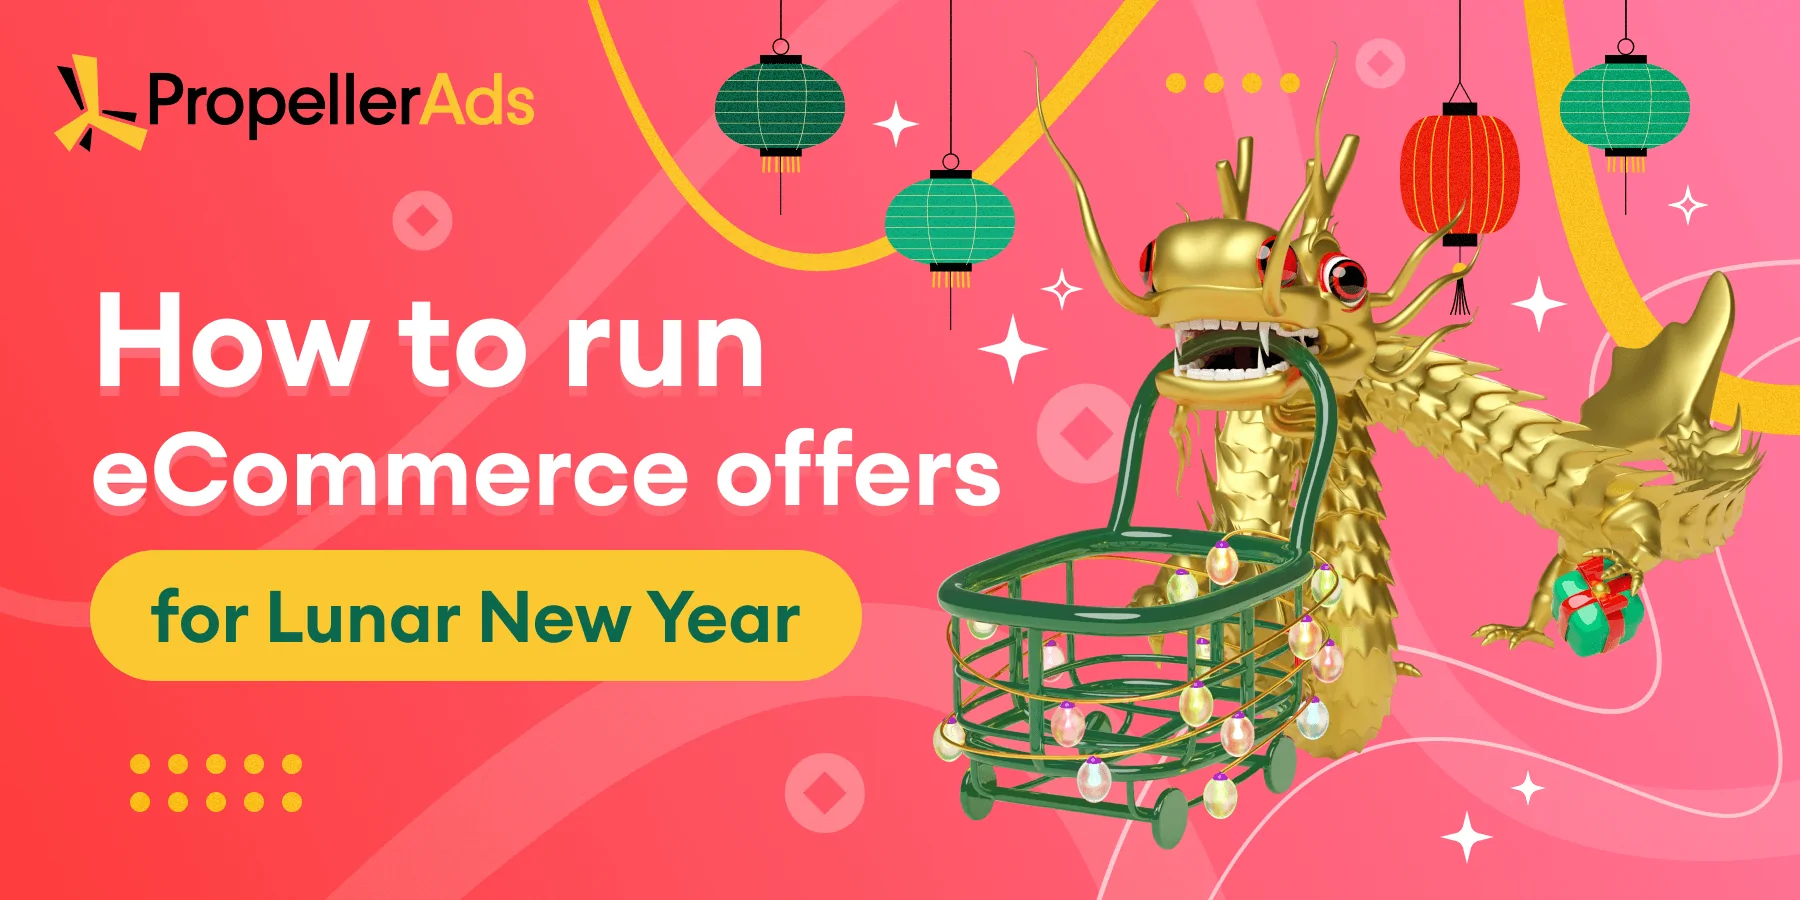 eCommerce offers during Lunar New Year